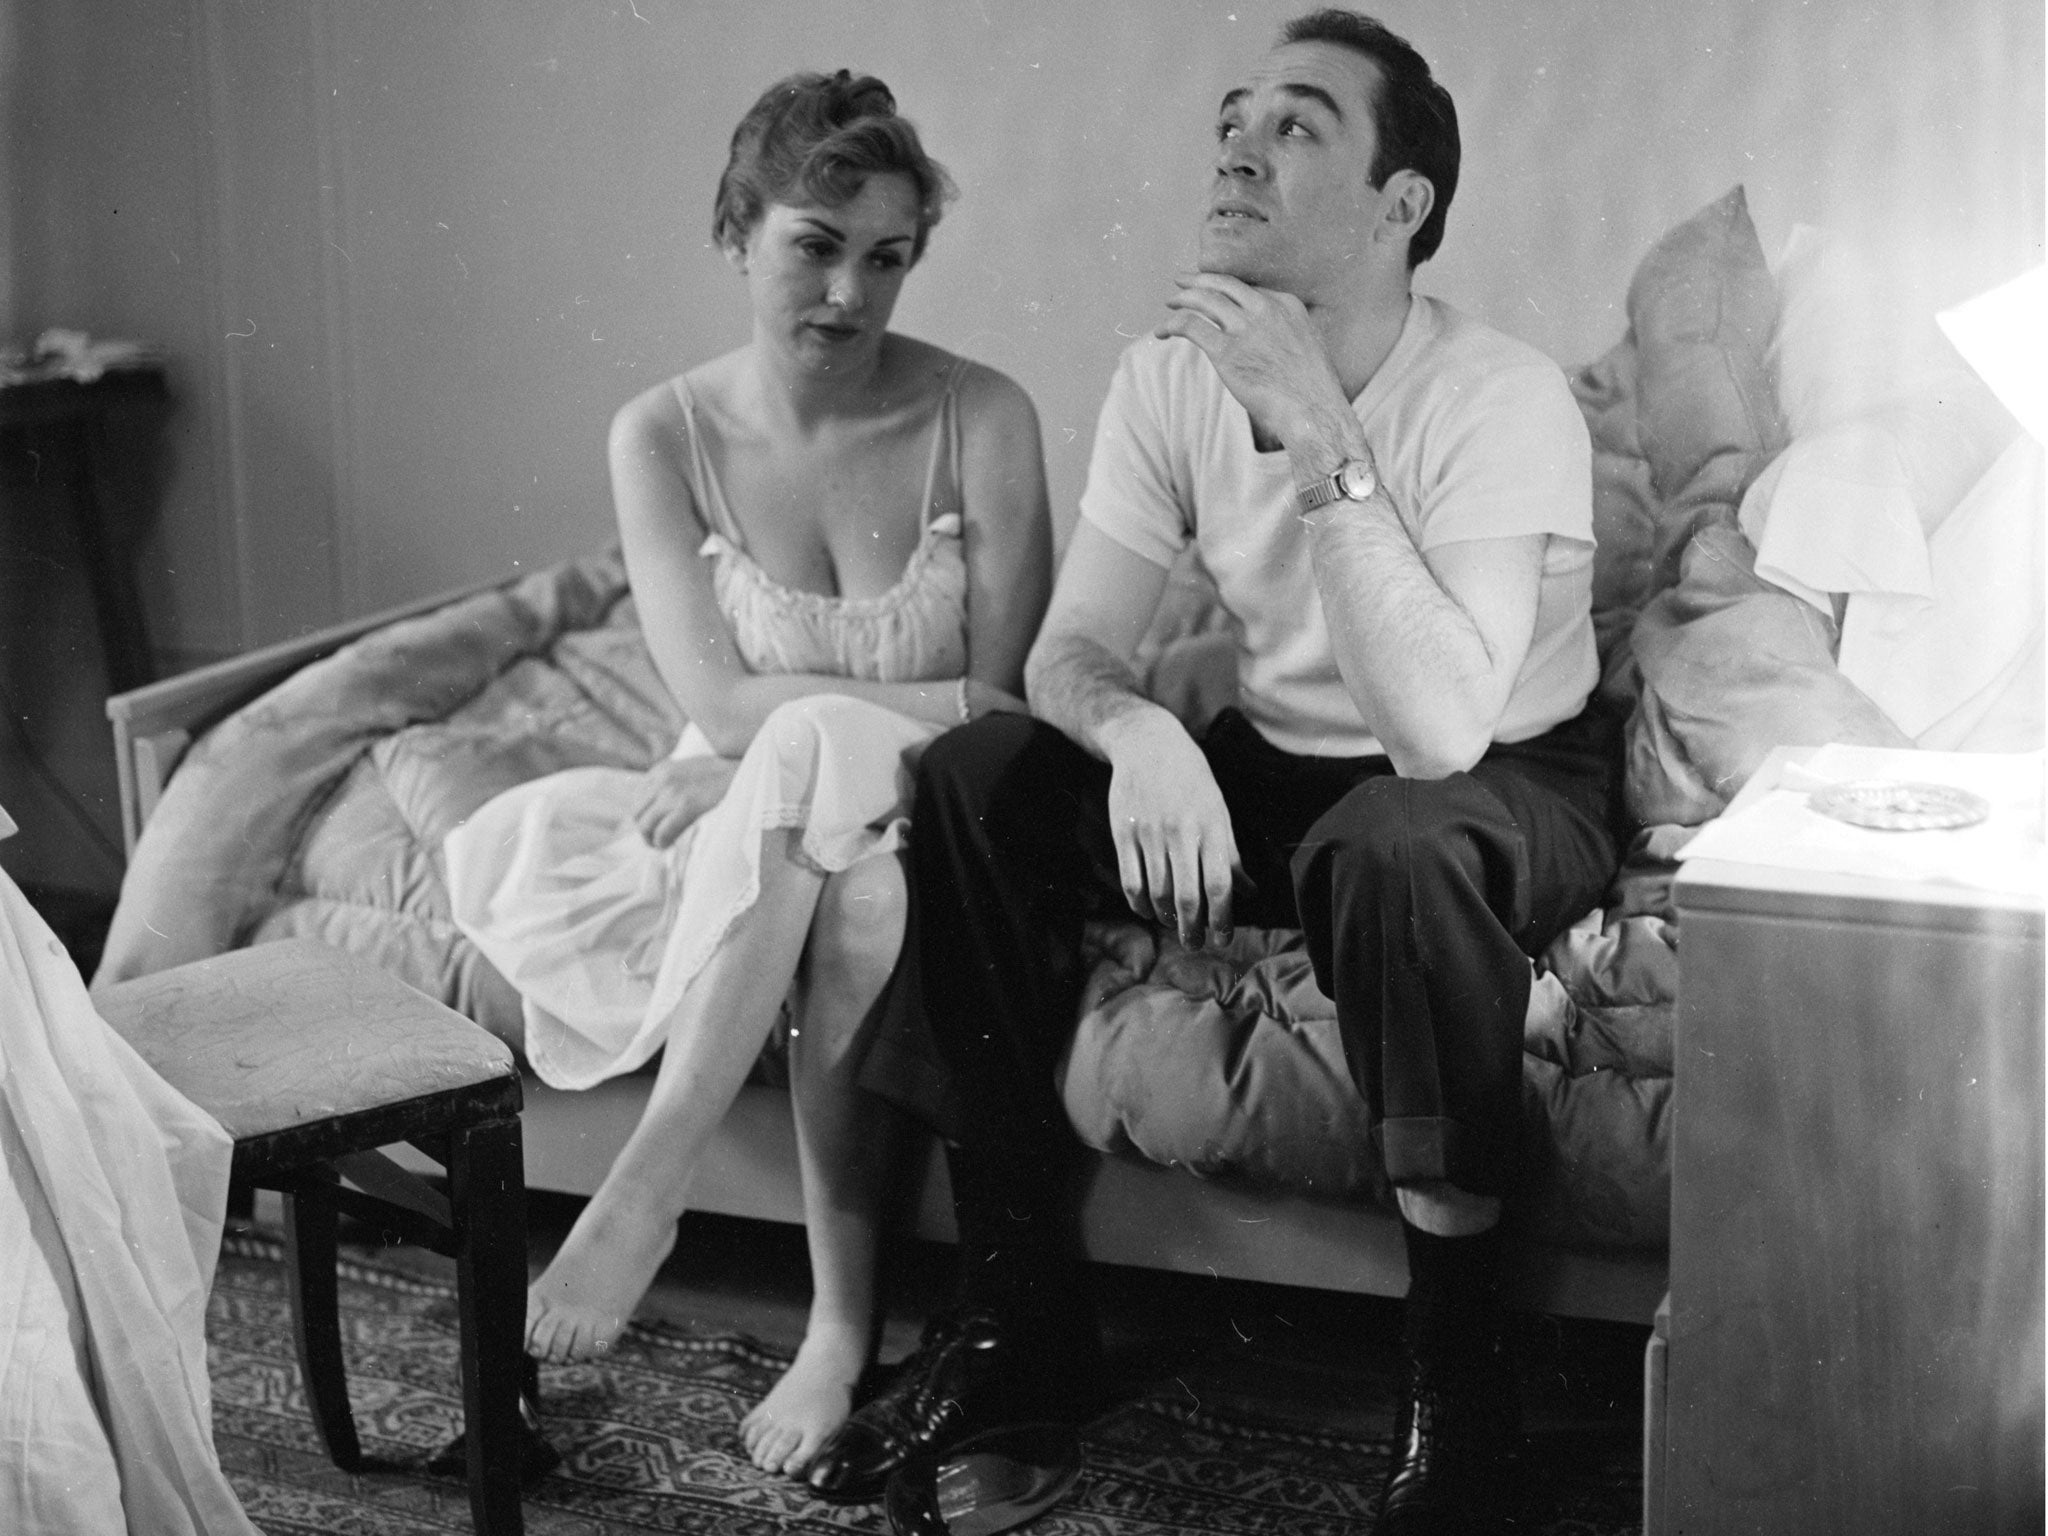 circa 1955: A married couple contemplating divorce. (Photo by Orlando /Three Lions/Getty Images)